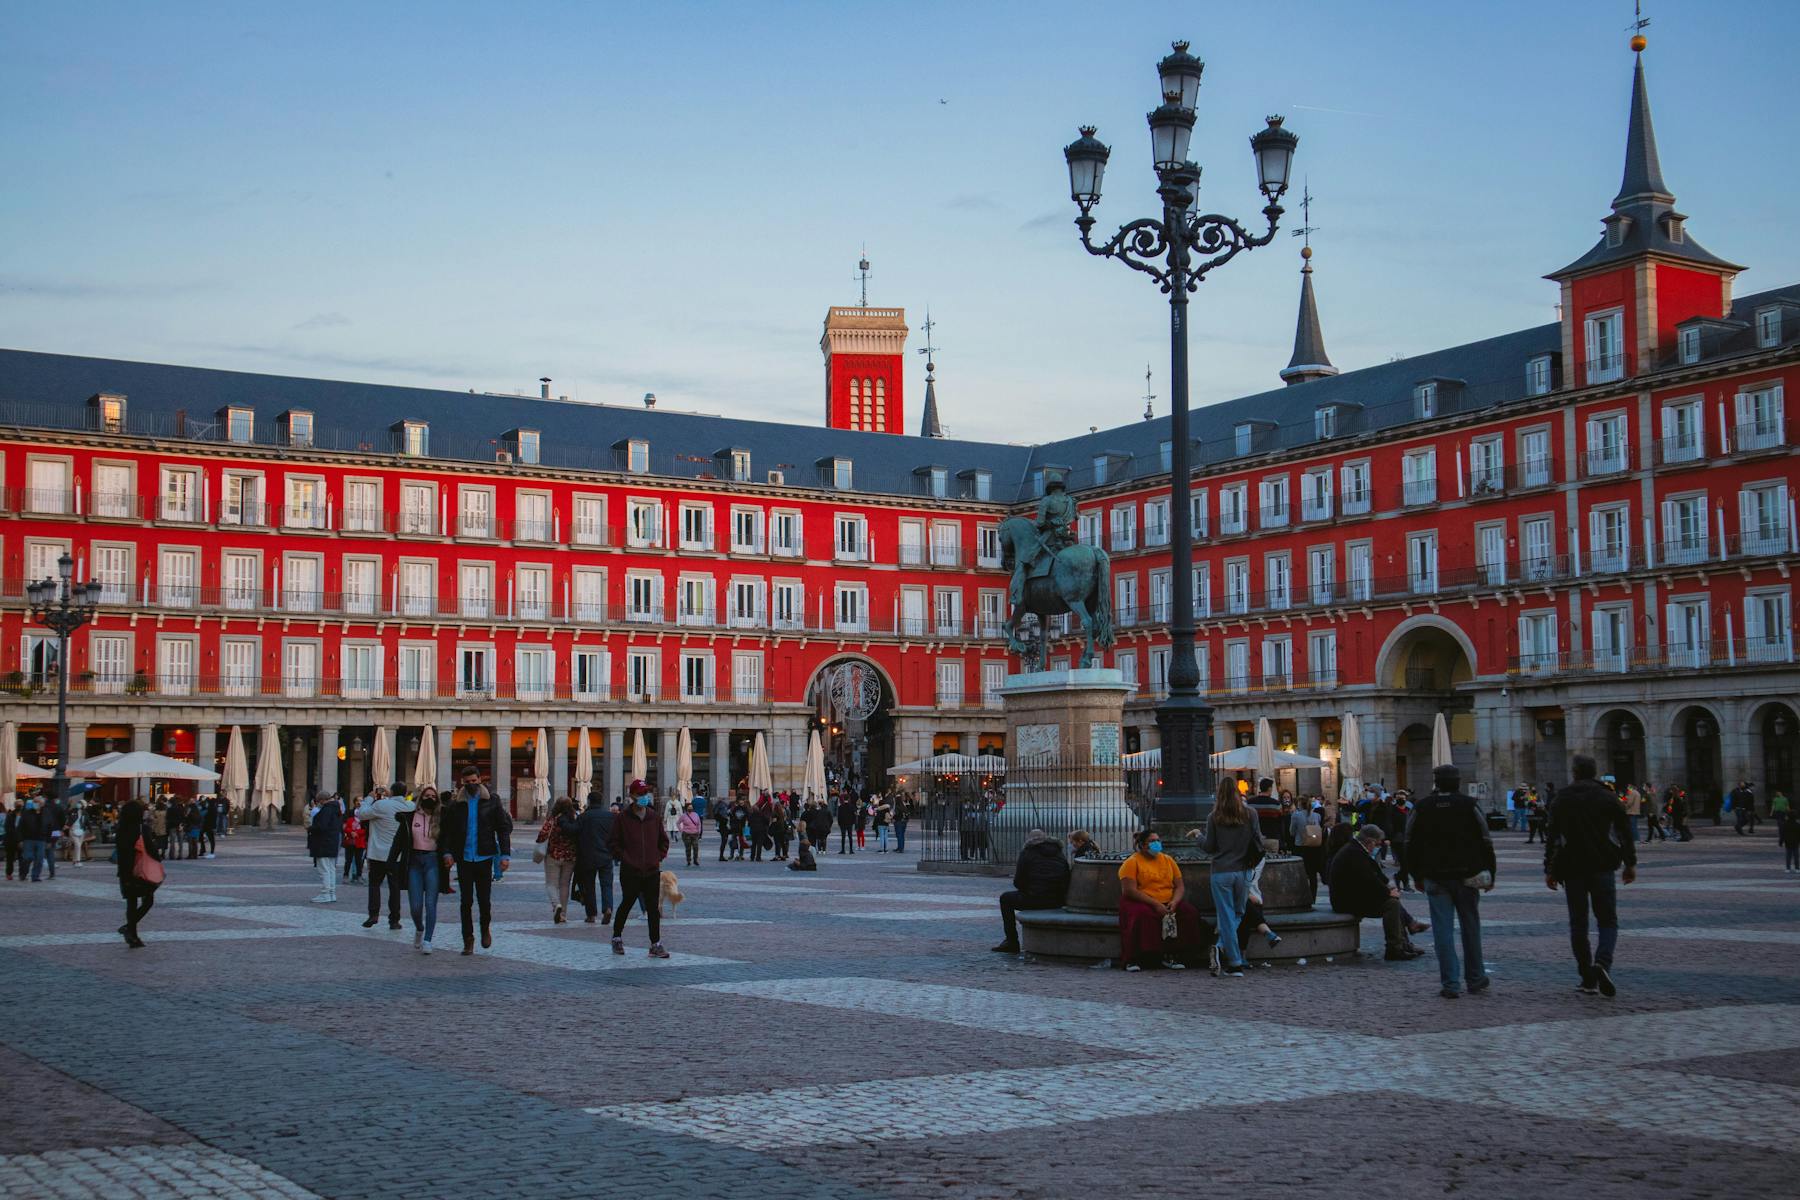 Late evening falling upon the Plaza Mayor in Madrid, Spain